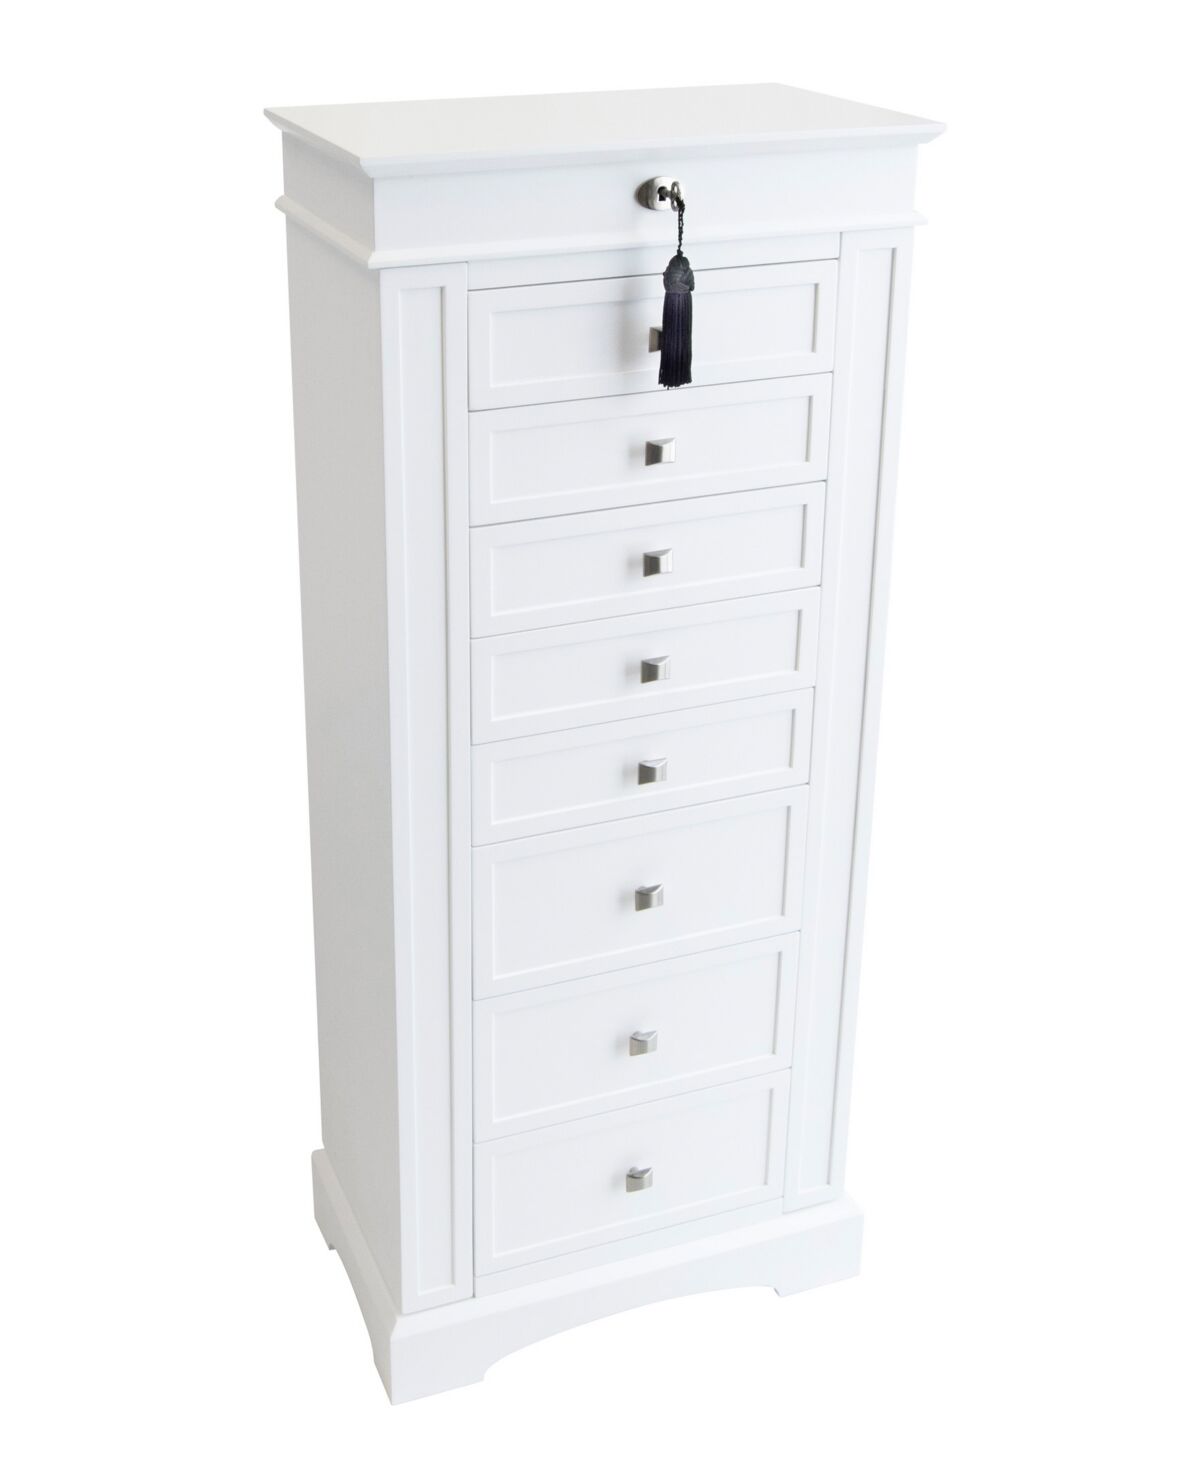 Mele & Co Olympia Wooden Jewelry Armoire in Finish - White